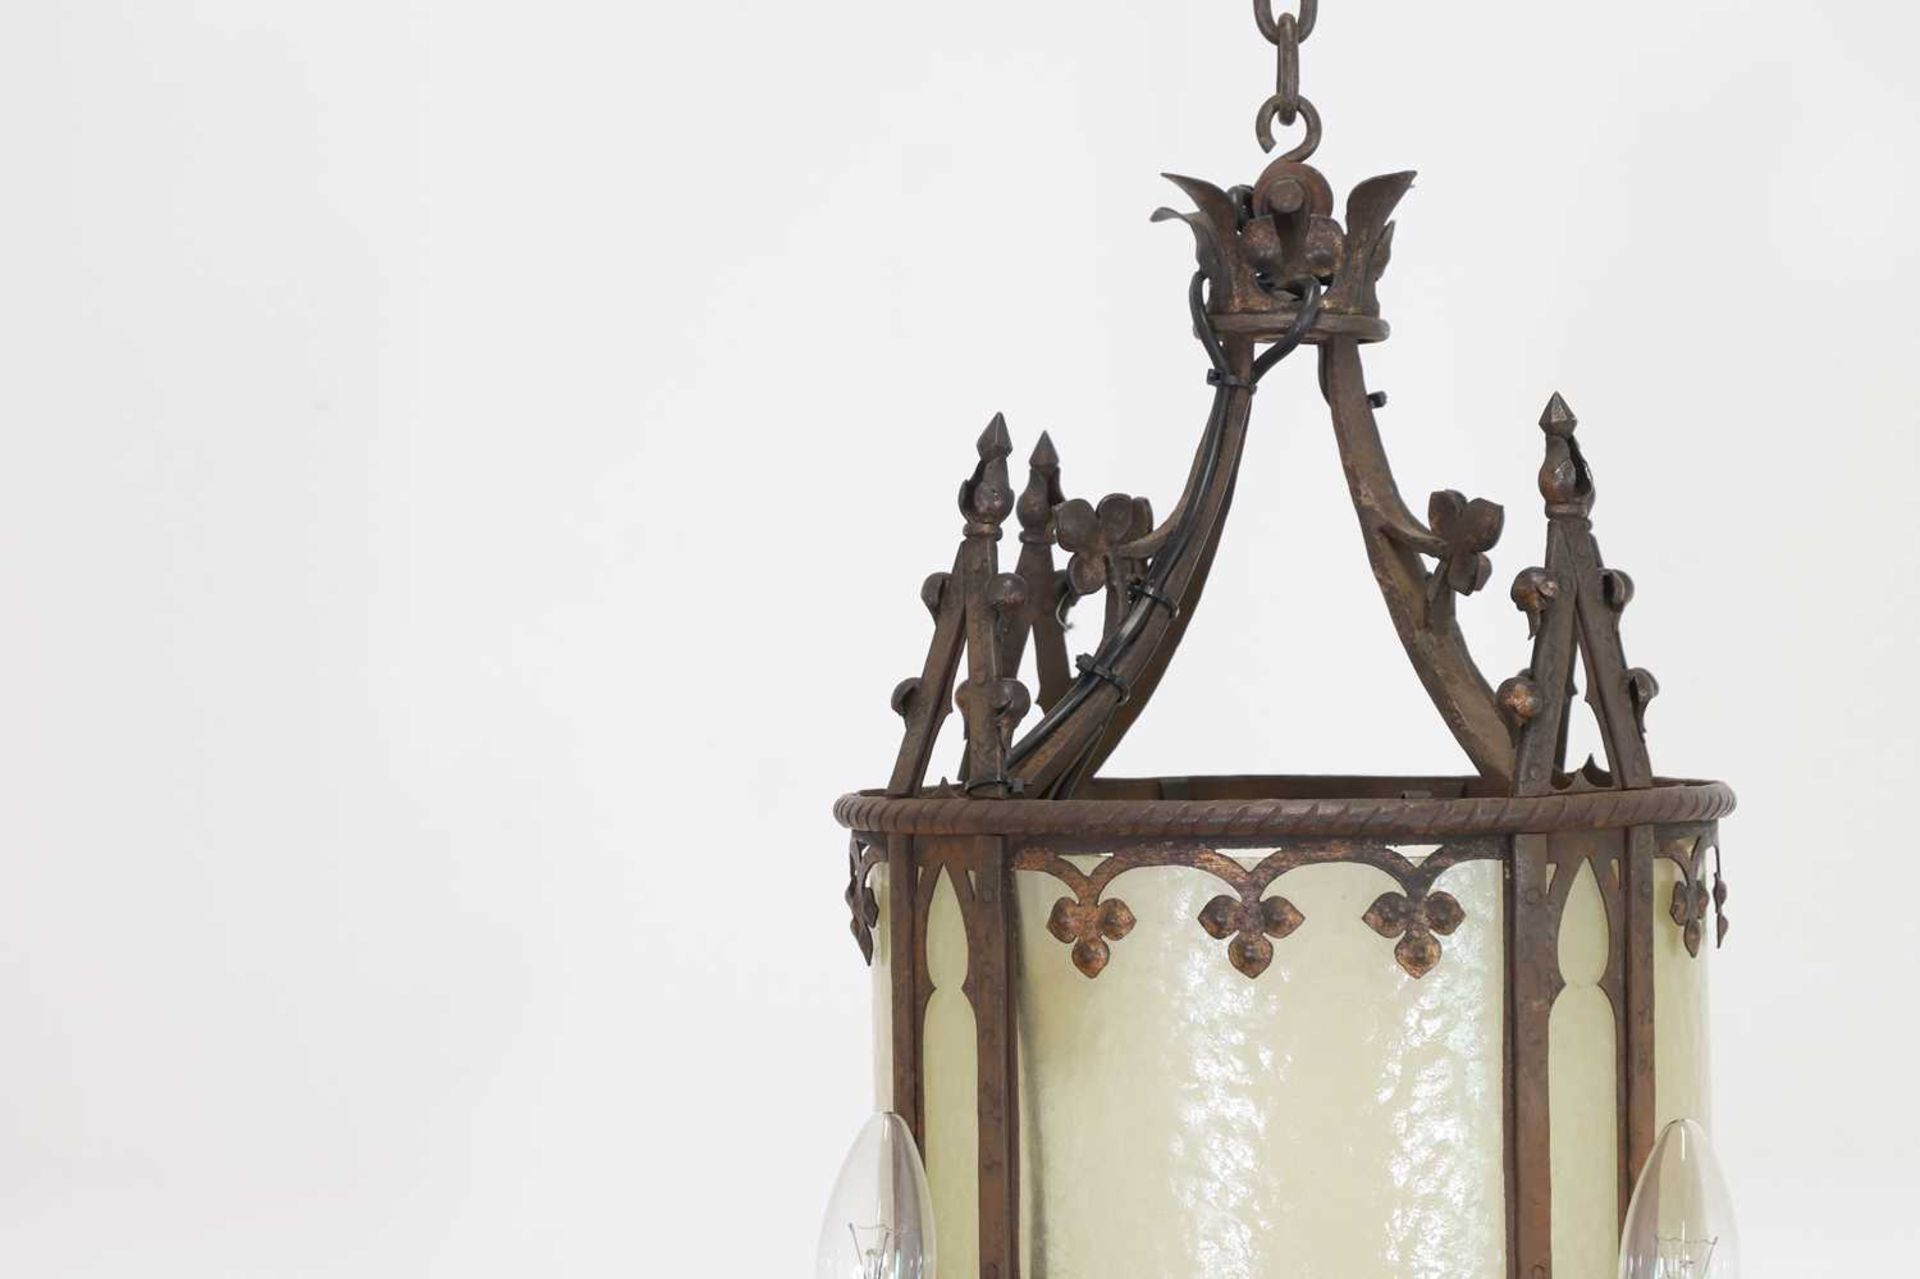 A Gothic wrought iron and glass lantern, - Image 4 of 4